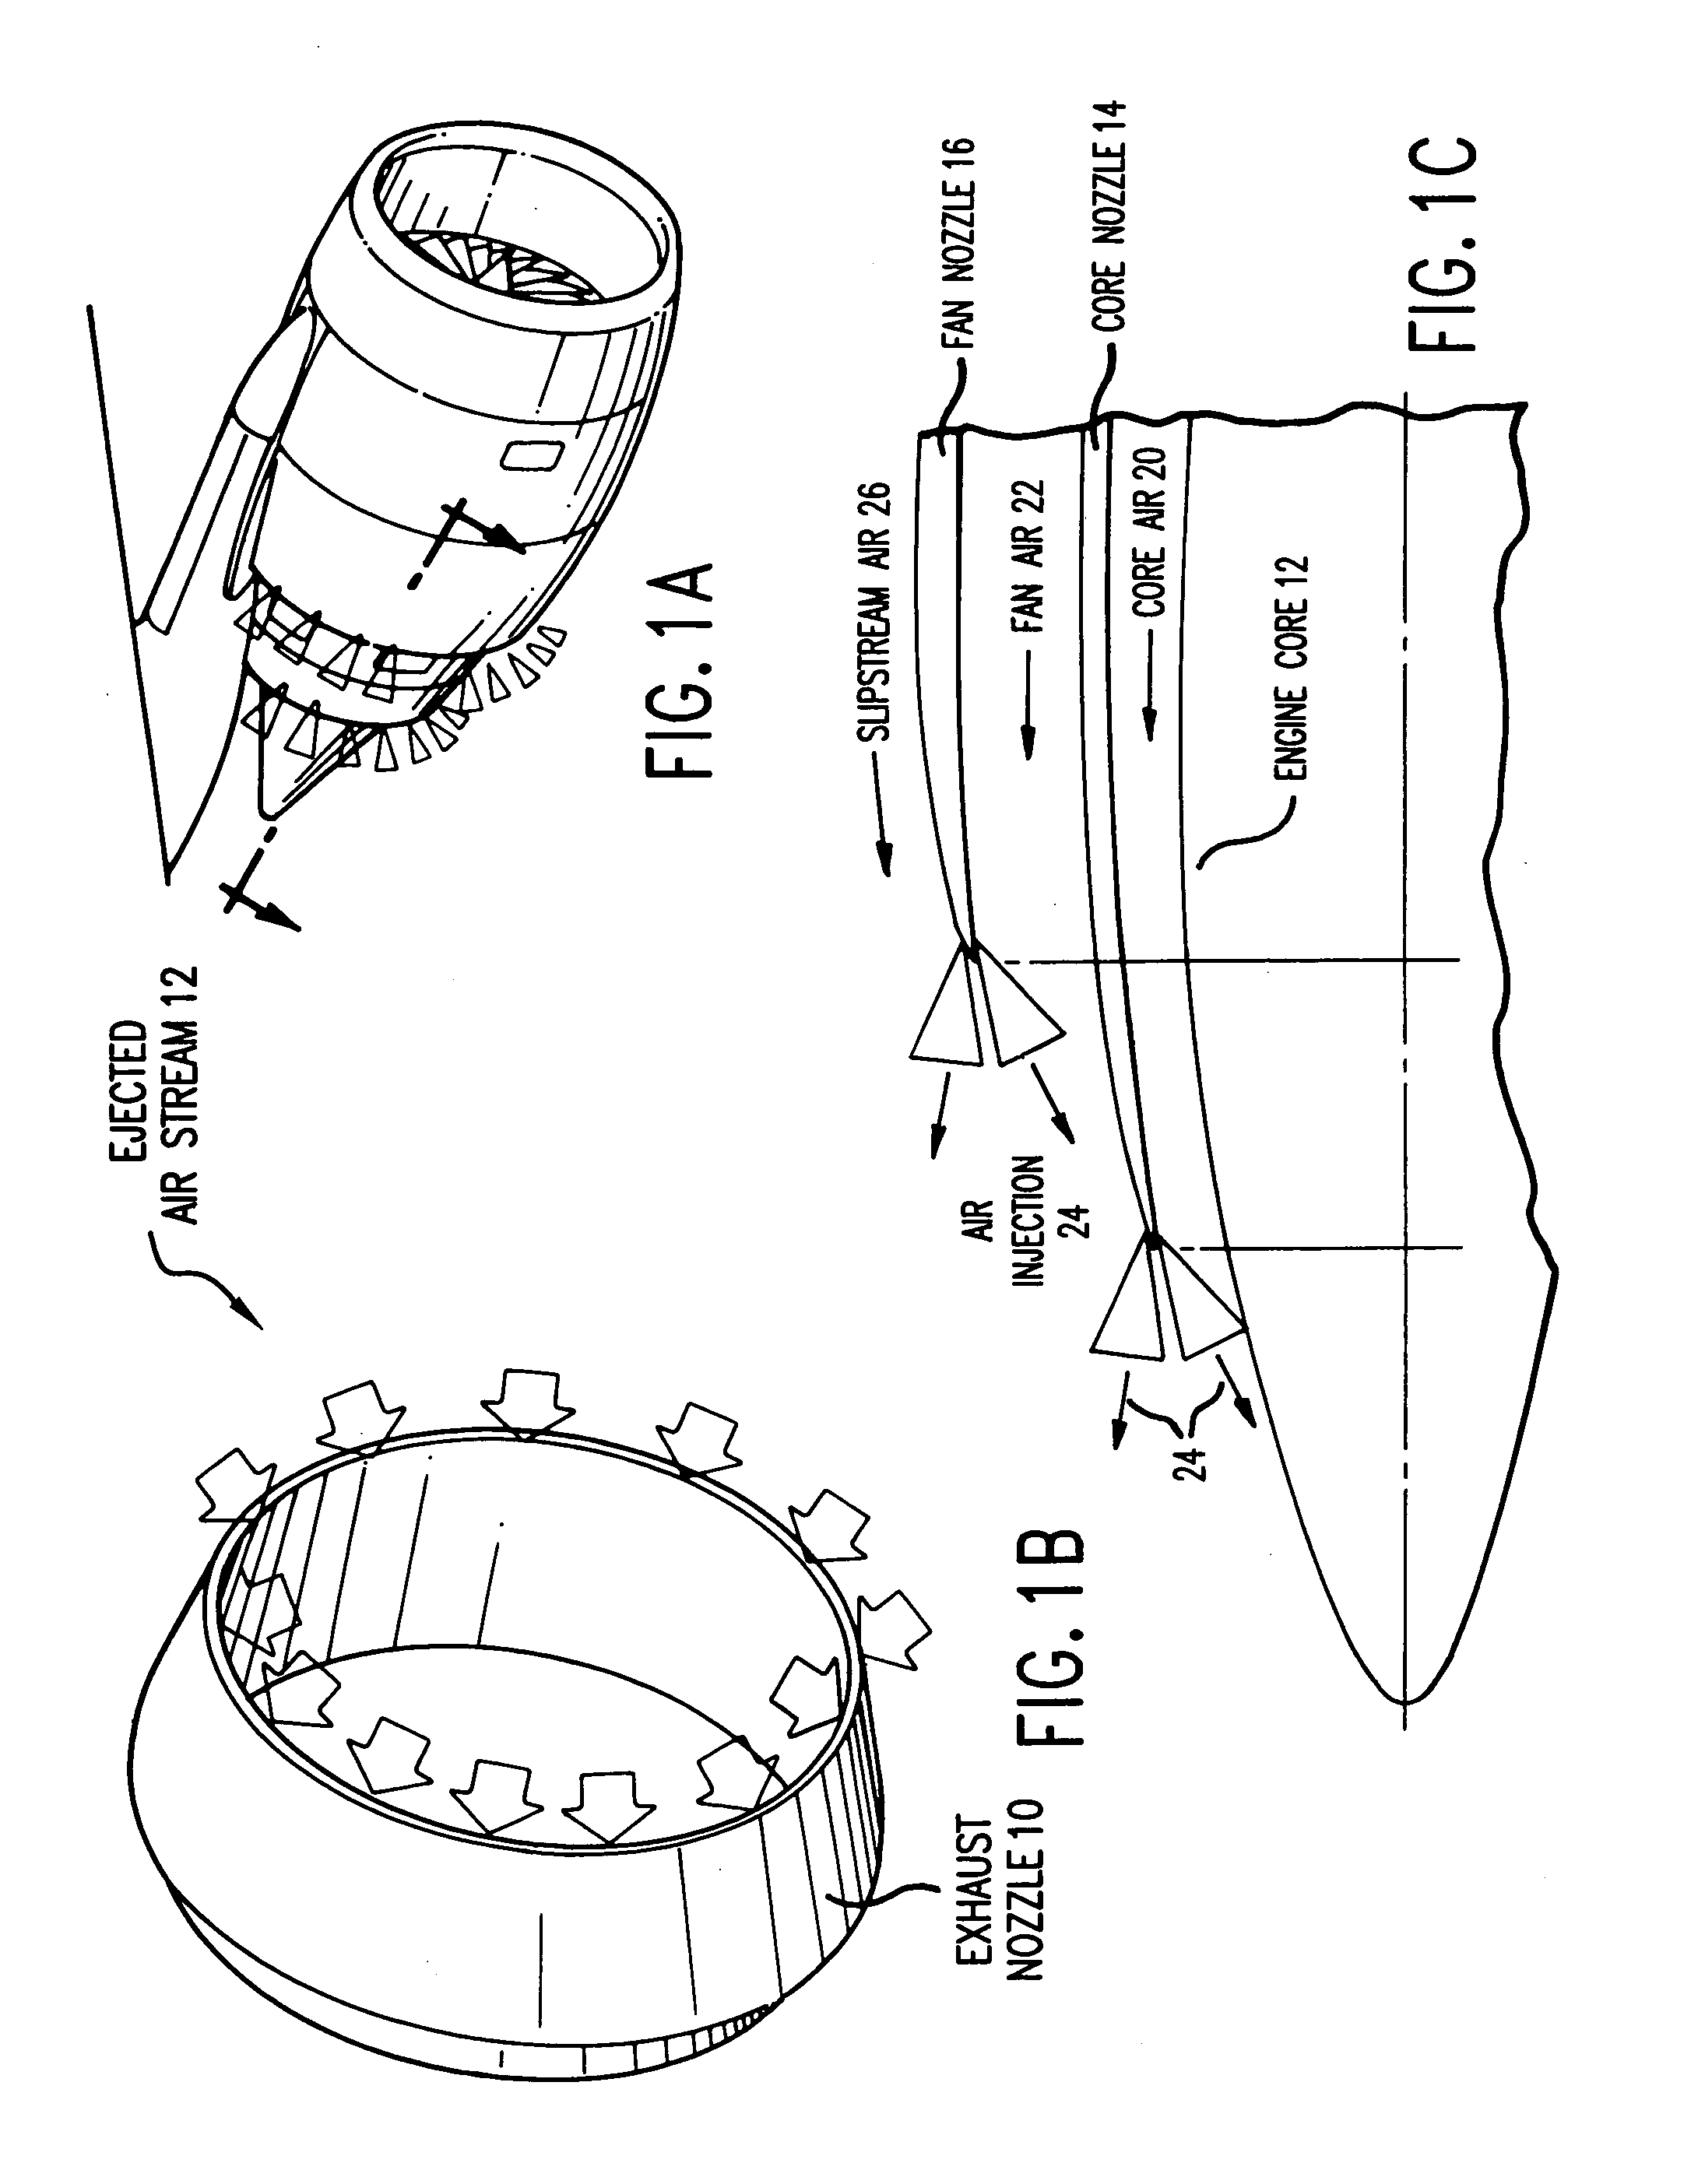 Apparatus, method and system for gas turbine engine noise reduction